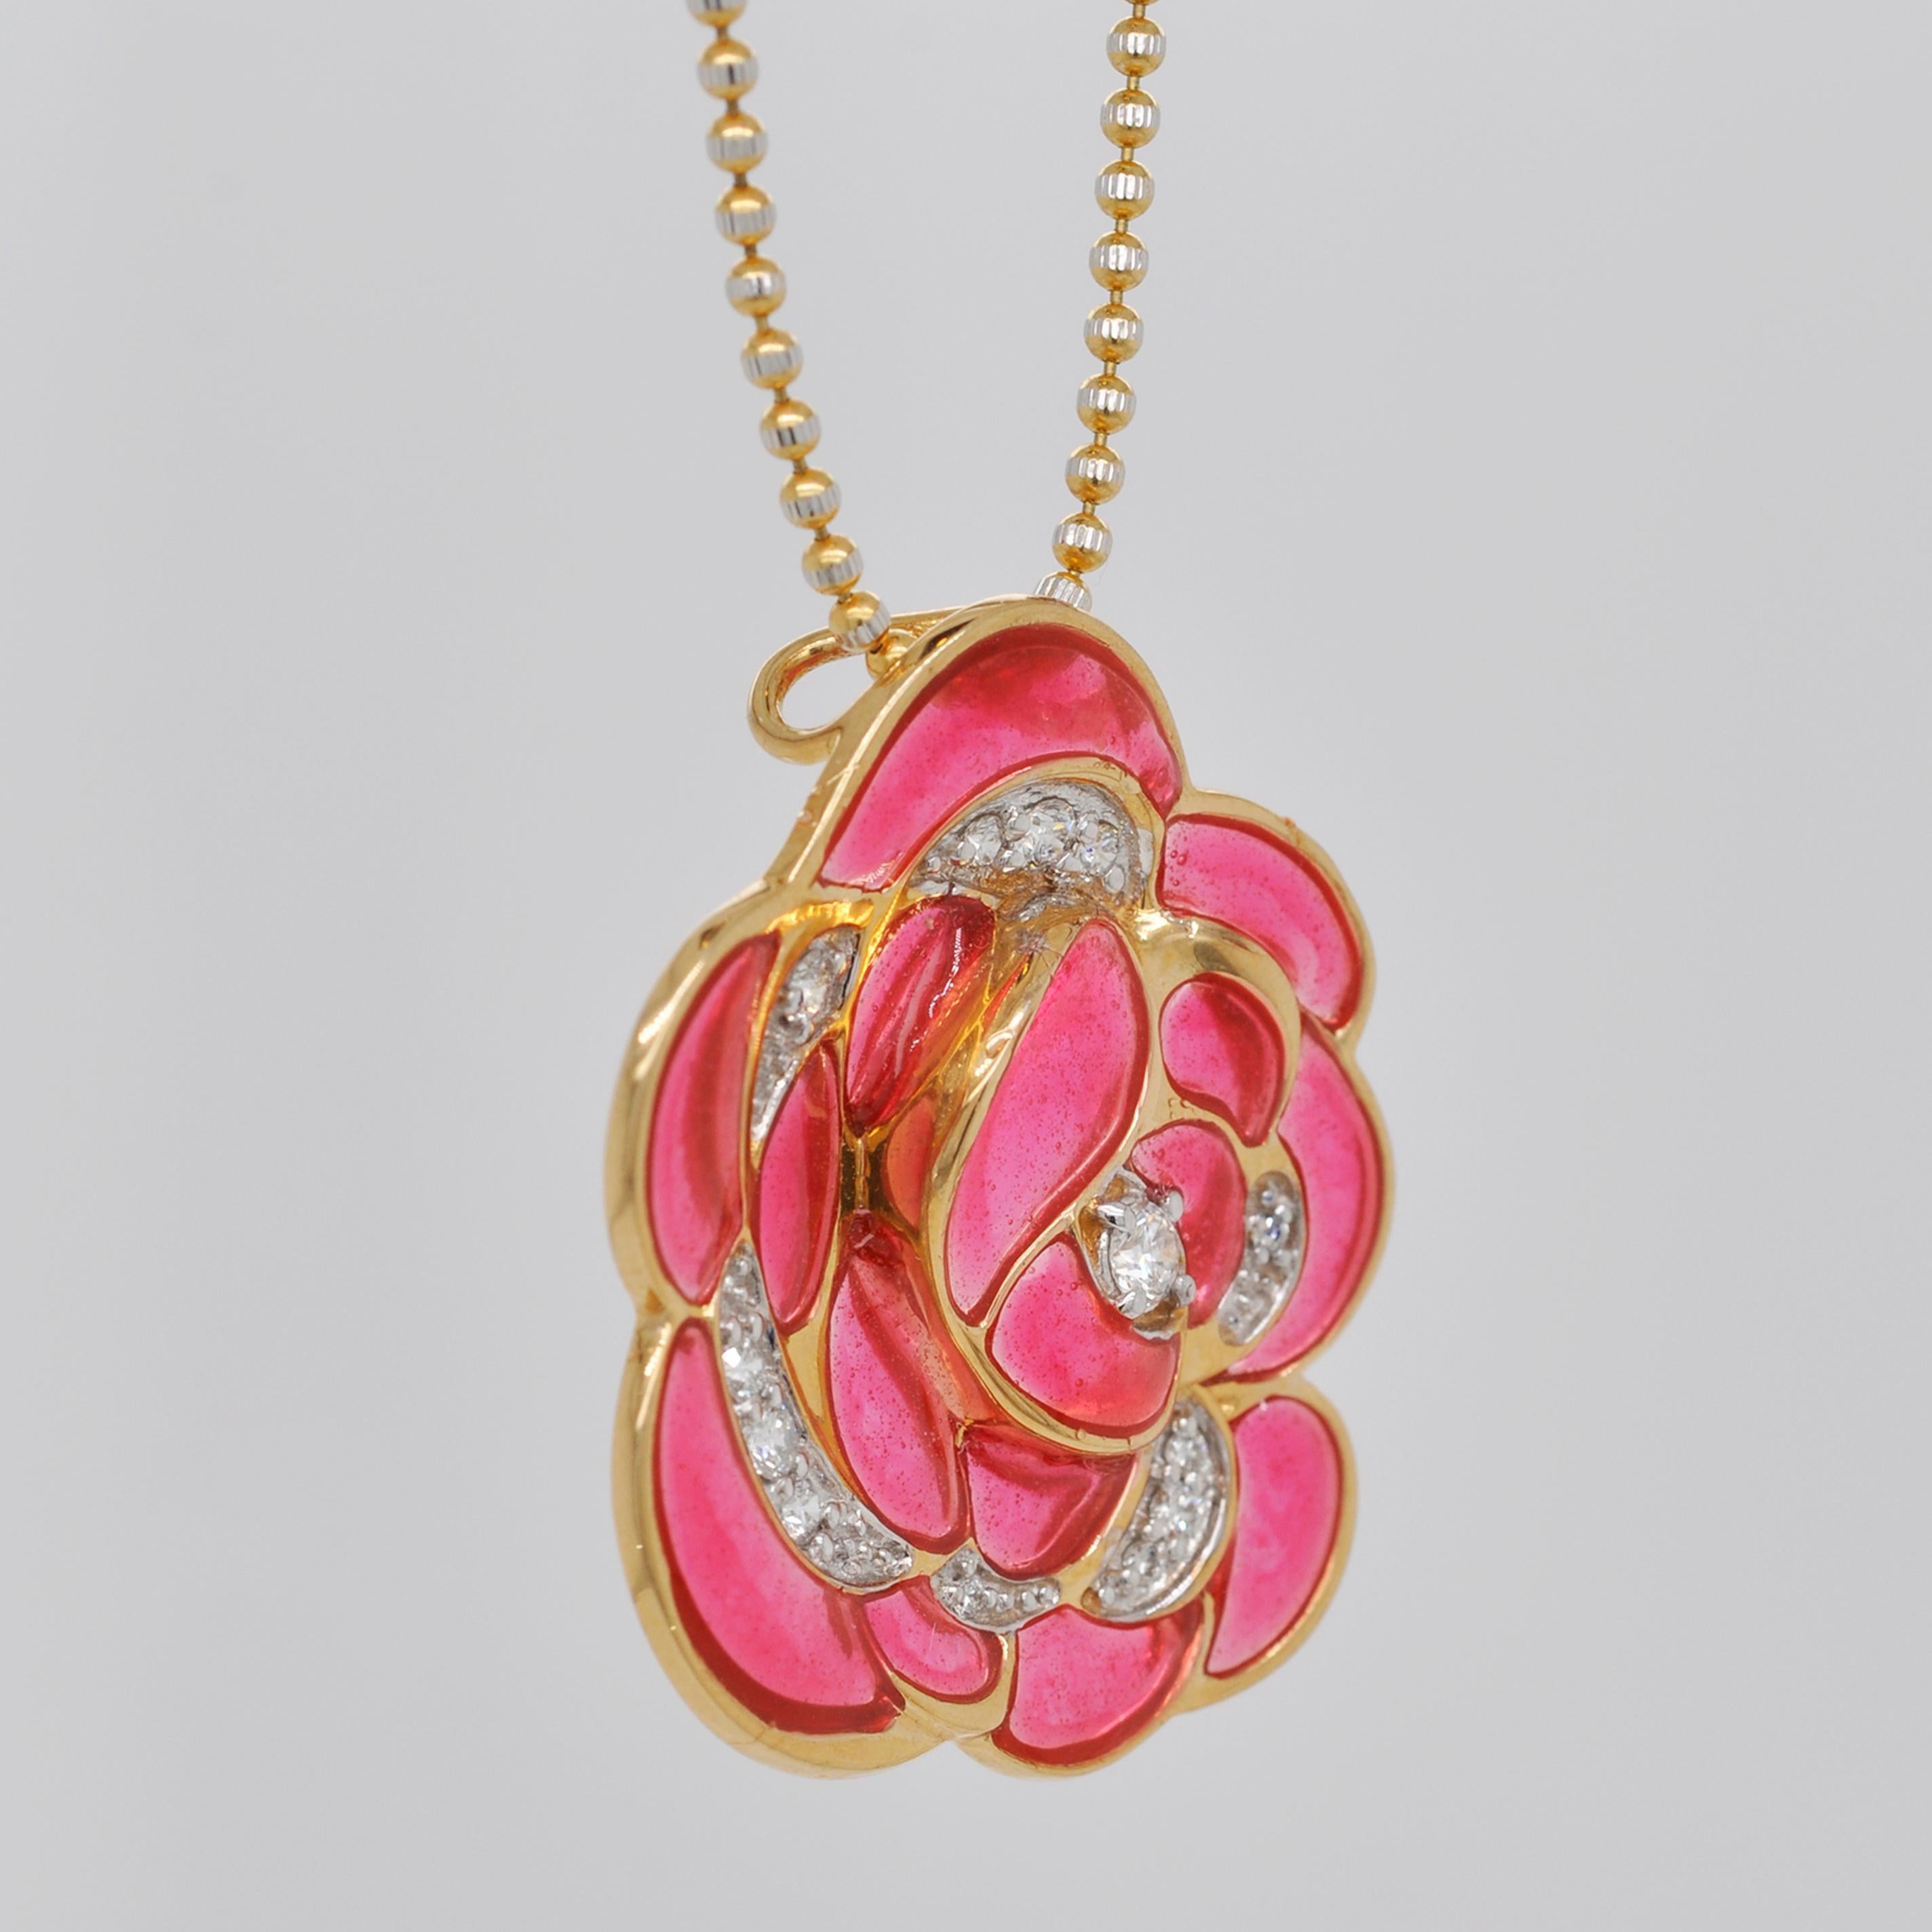 18 Karat Gold Pink Enamel Plique-a-Jour Rose Pendant Necklace In New Condition For Sale In Jaipur, Rajasthan